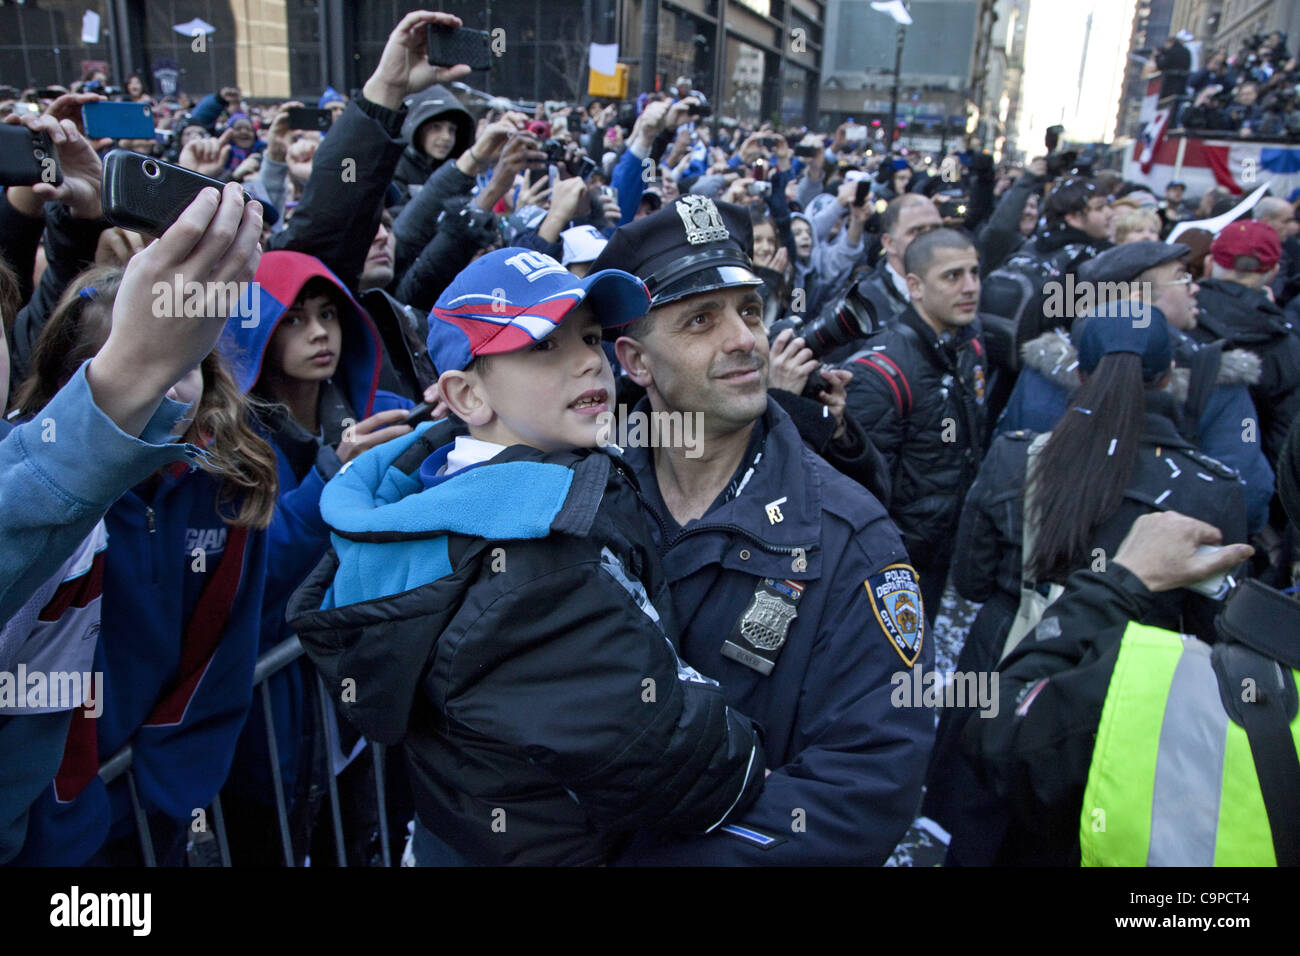 Feb. 7, 2012 - New York, New York, U.S - During the Superbowl Champion Parade fans cheer their winning team the New York Giants riding up Broadway Ave. in Lower Manhattan. (Credit Image: © Gary Dwight Miller/ZUMAPRESS.com) Stock Photo